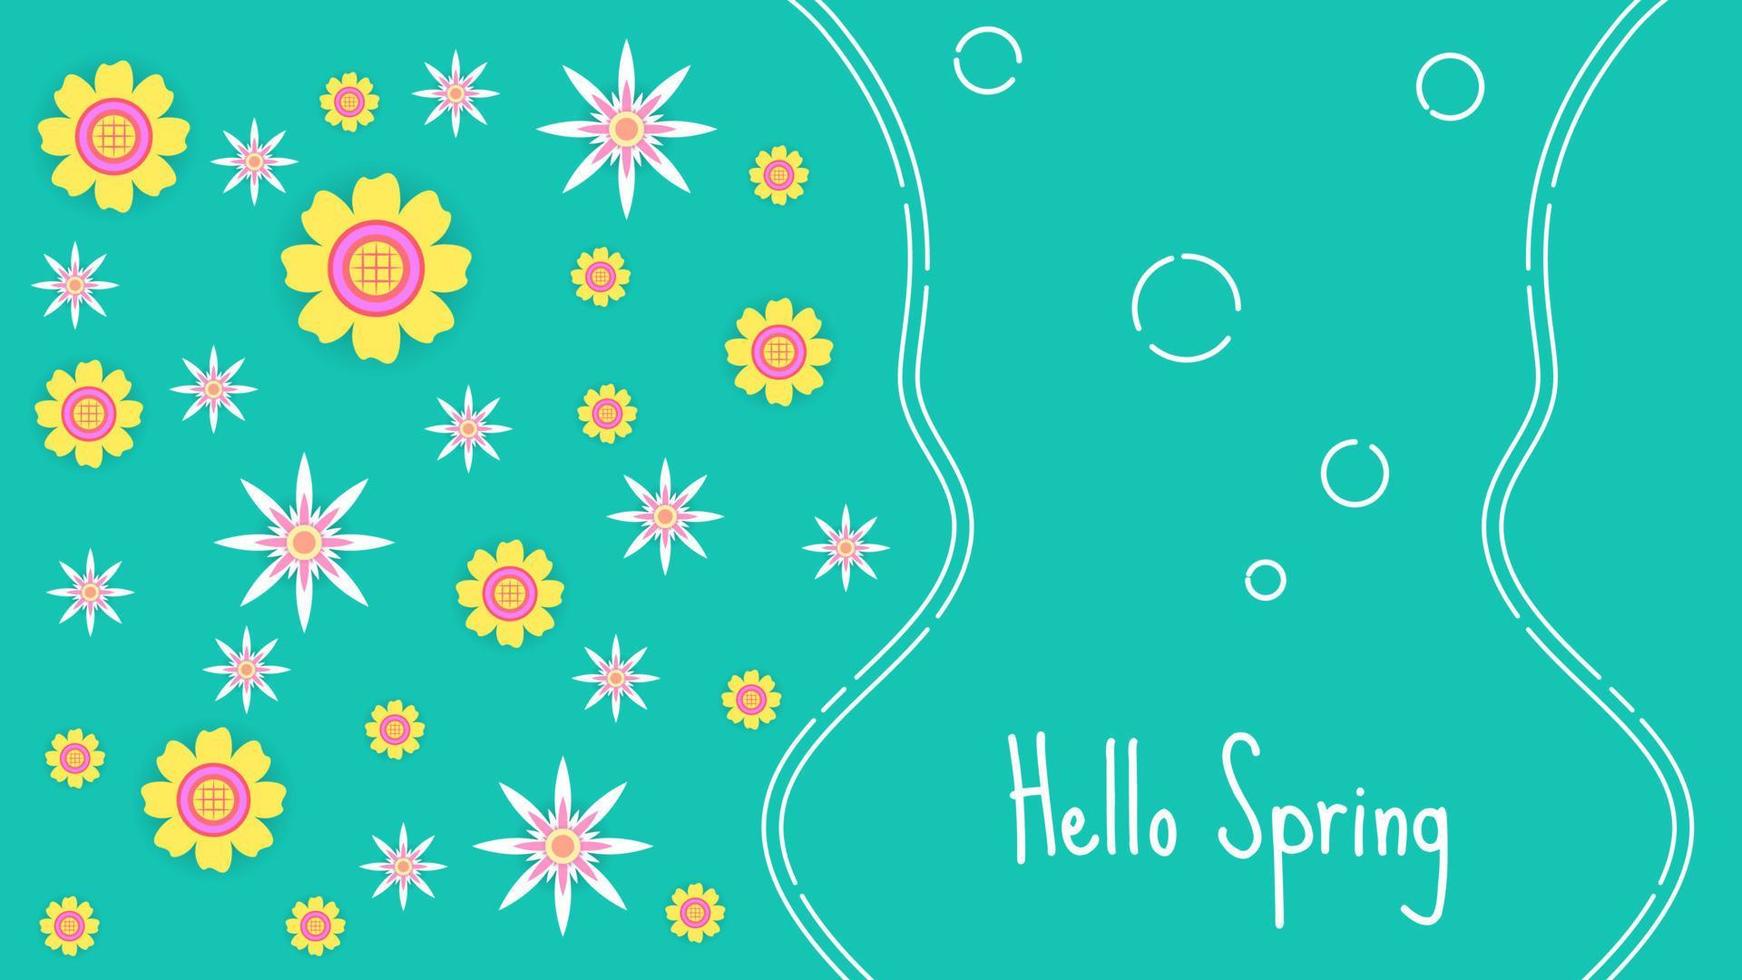 hello spring background desing with flowers. minimal, beatiful and simple concept. used for greeting card, banner, or wallpaper vector